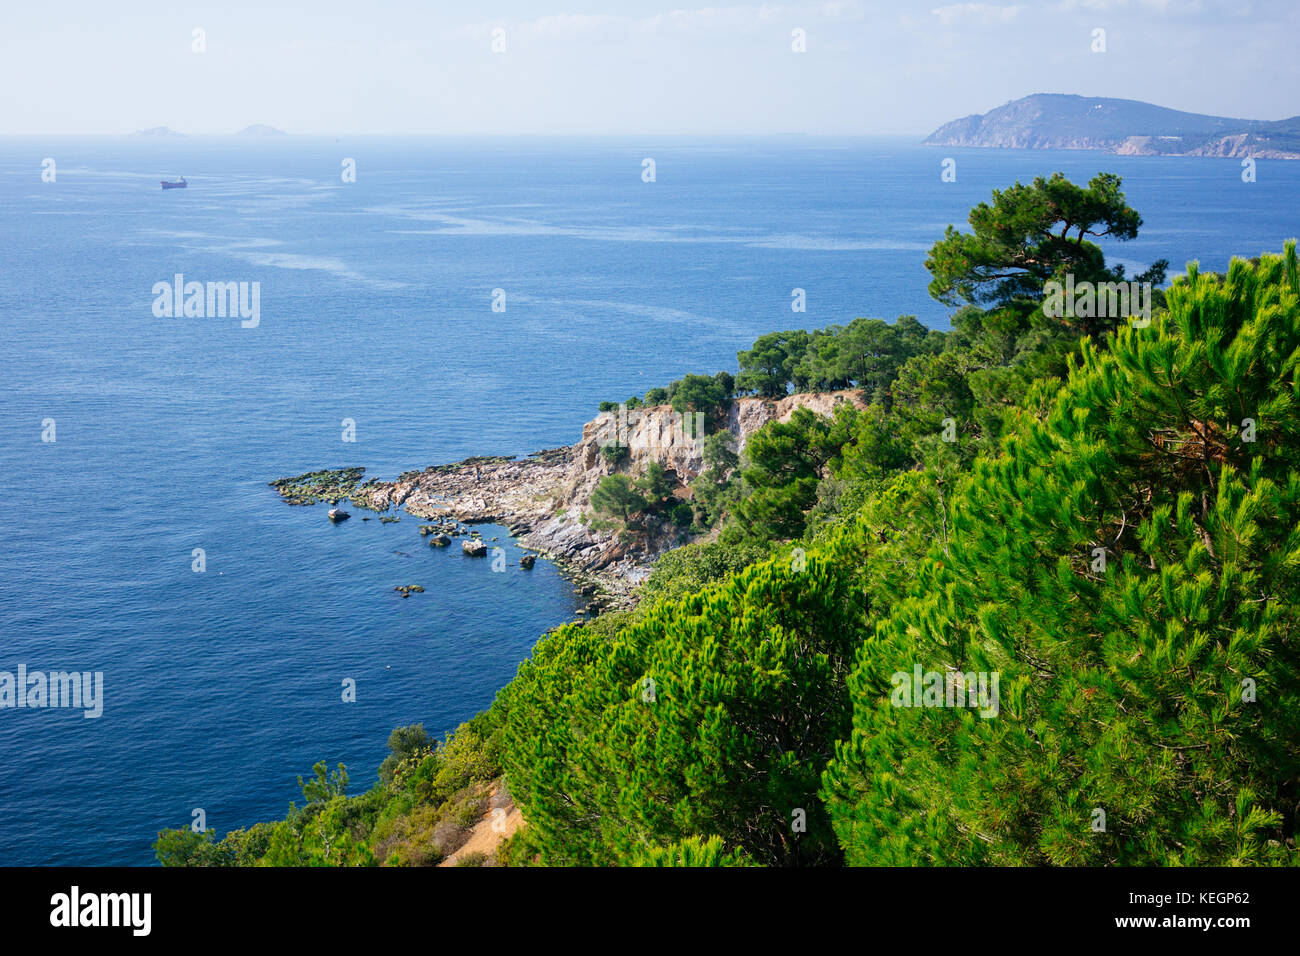 Mountainside covered with pines in Marmara sea selective focus Stock Photo